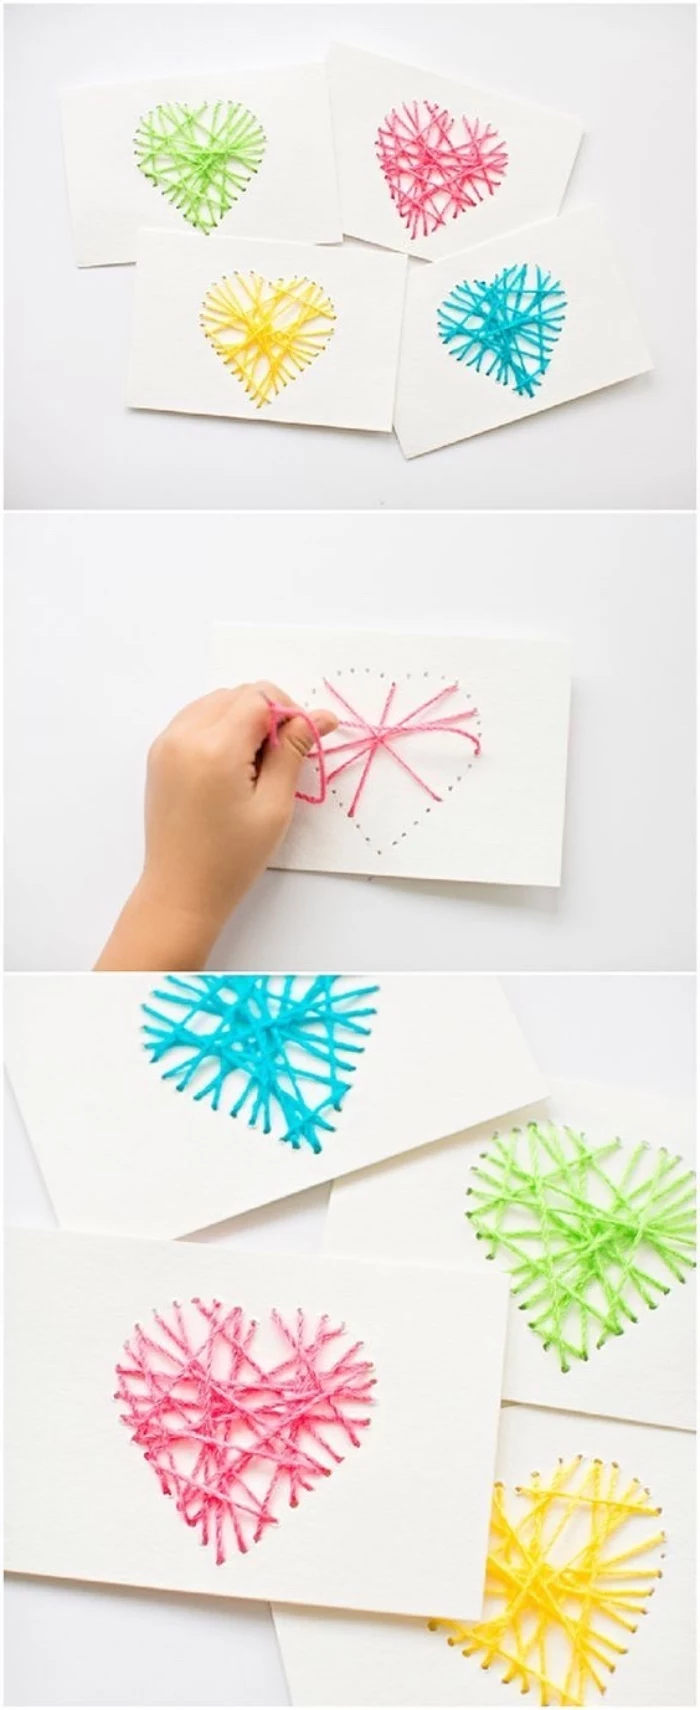 greeting cards, step by step, diy tutorial, preschool learning activities, hearts made of colourful strands